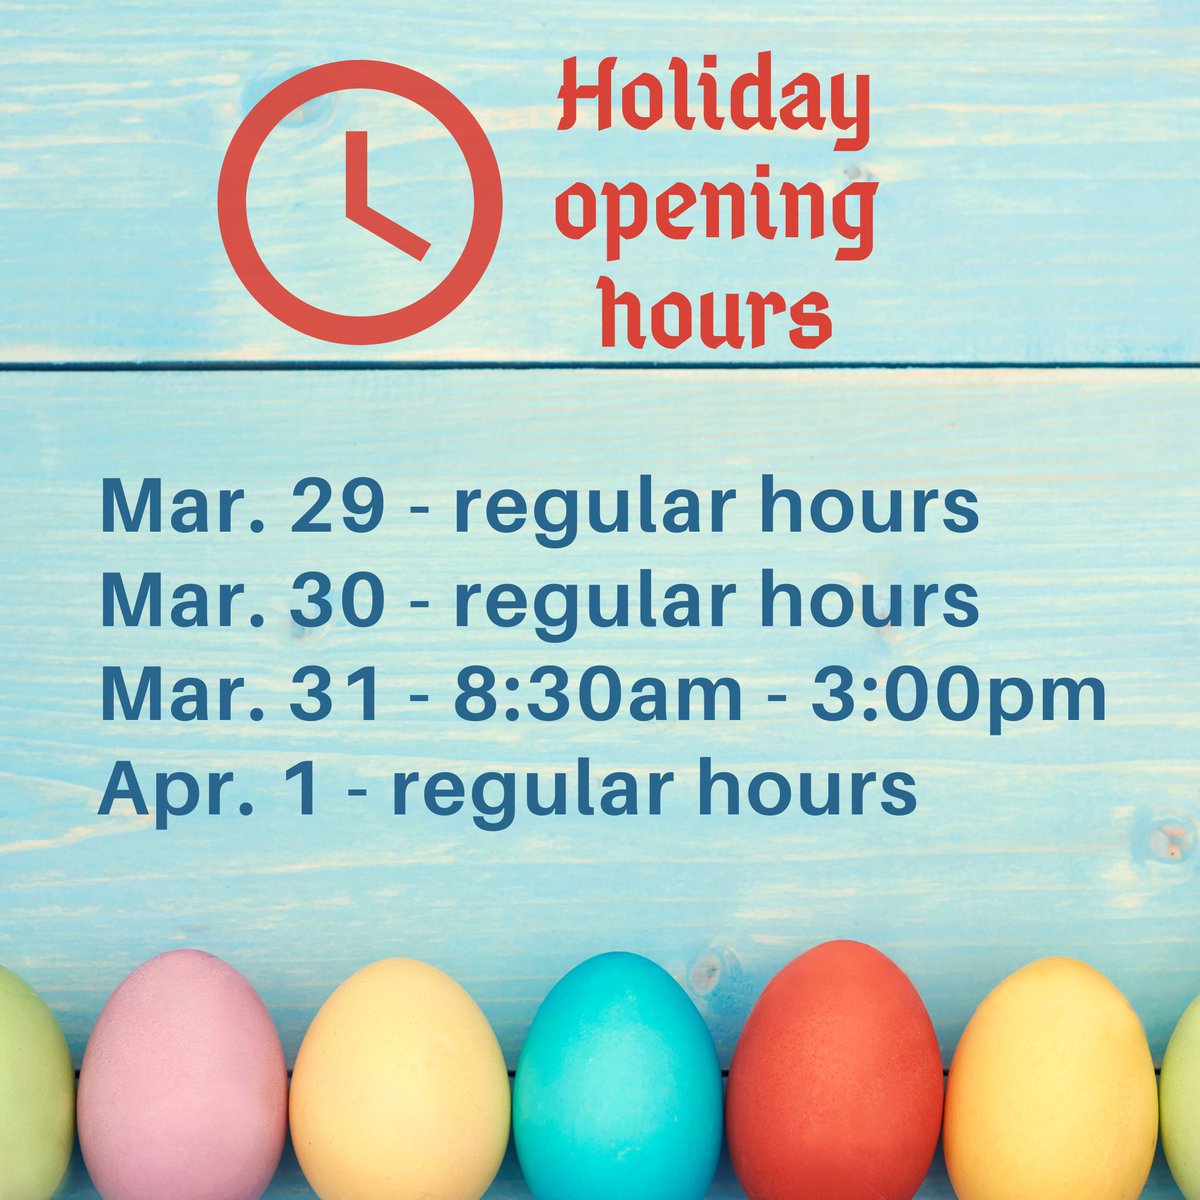 Planning your Easter weekend festivities? Here are our special opening hours to ensure you don't miss out on any delicious moments! #eurobistro #ottawa #ottawaeats #ottawafood #downtownottawa #foodieottawa #supportlocalbusiness
#elginstreetottawa #easterweekendhours